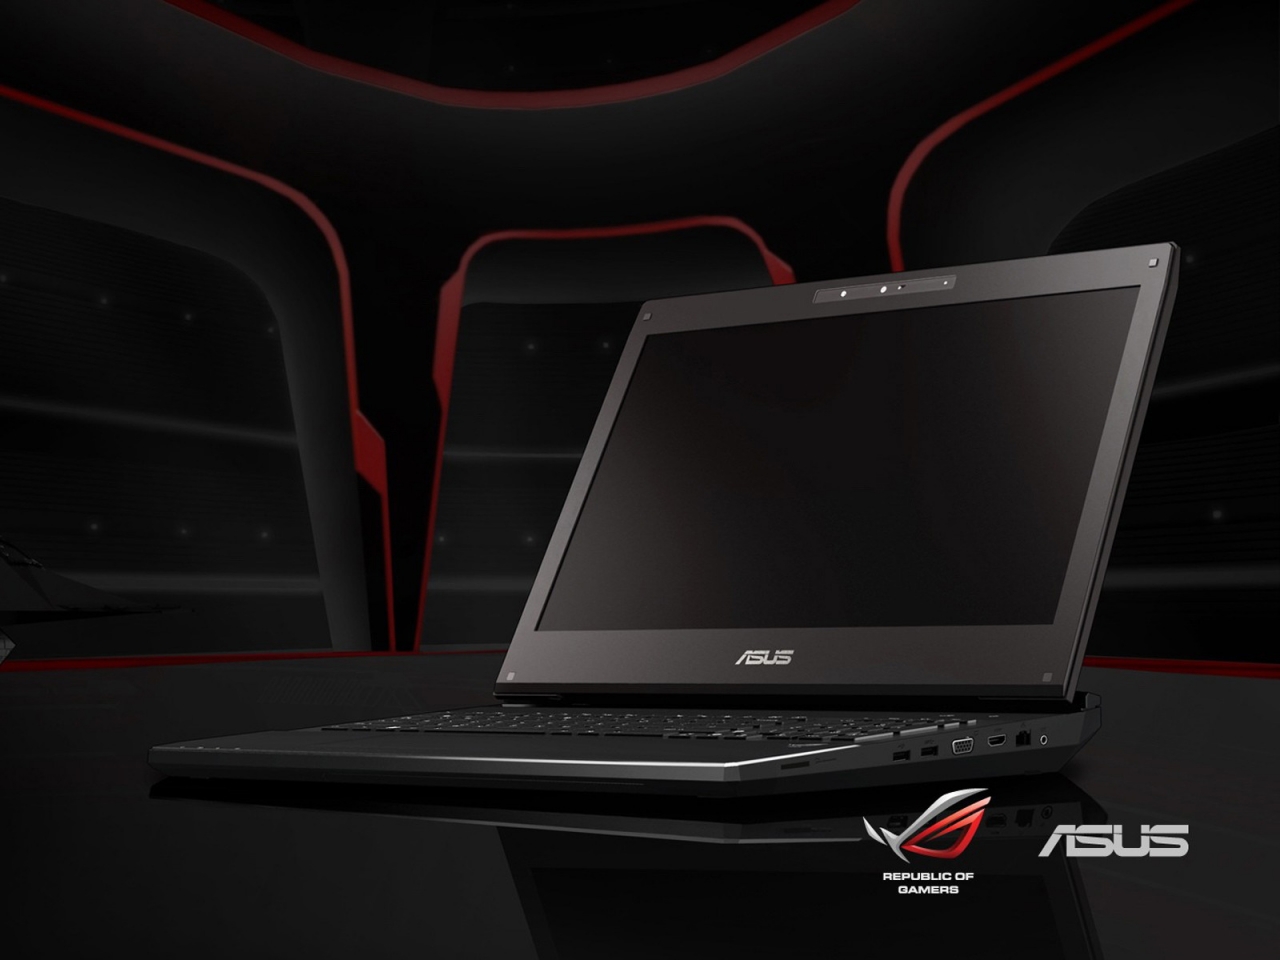 Asus Notebook for 1280 x 960 resolution